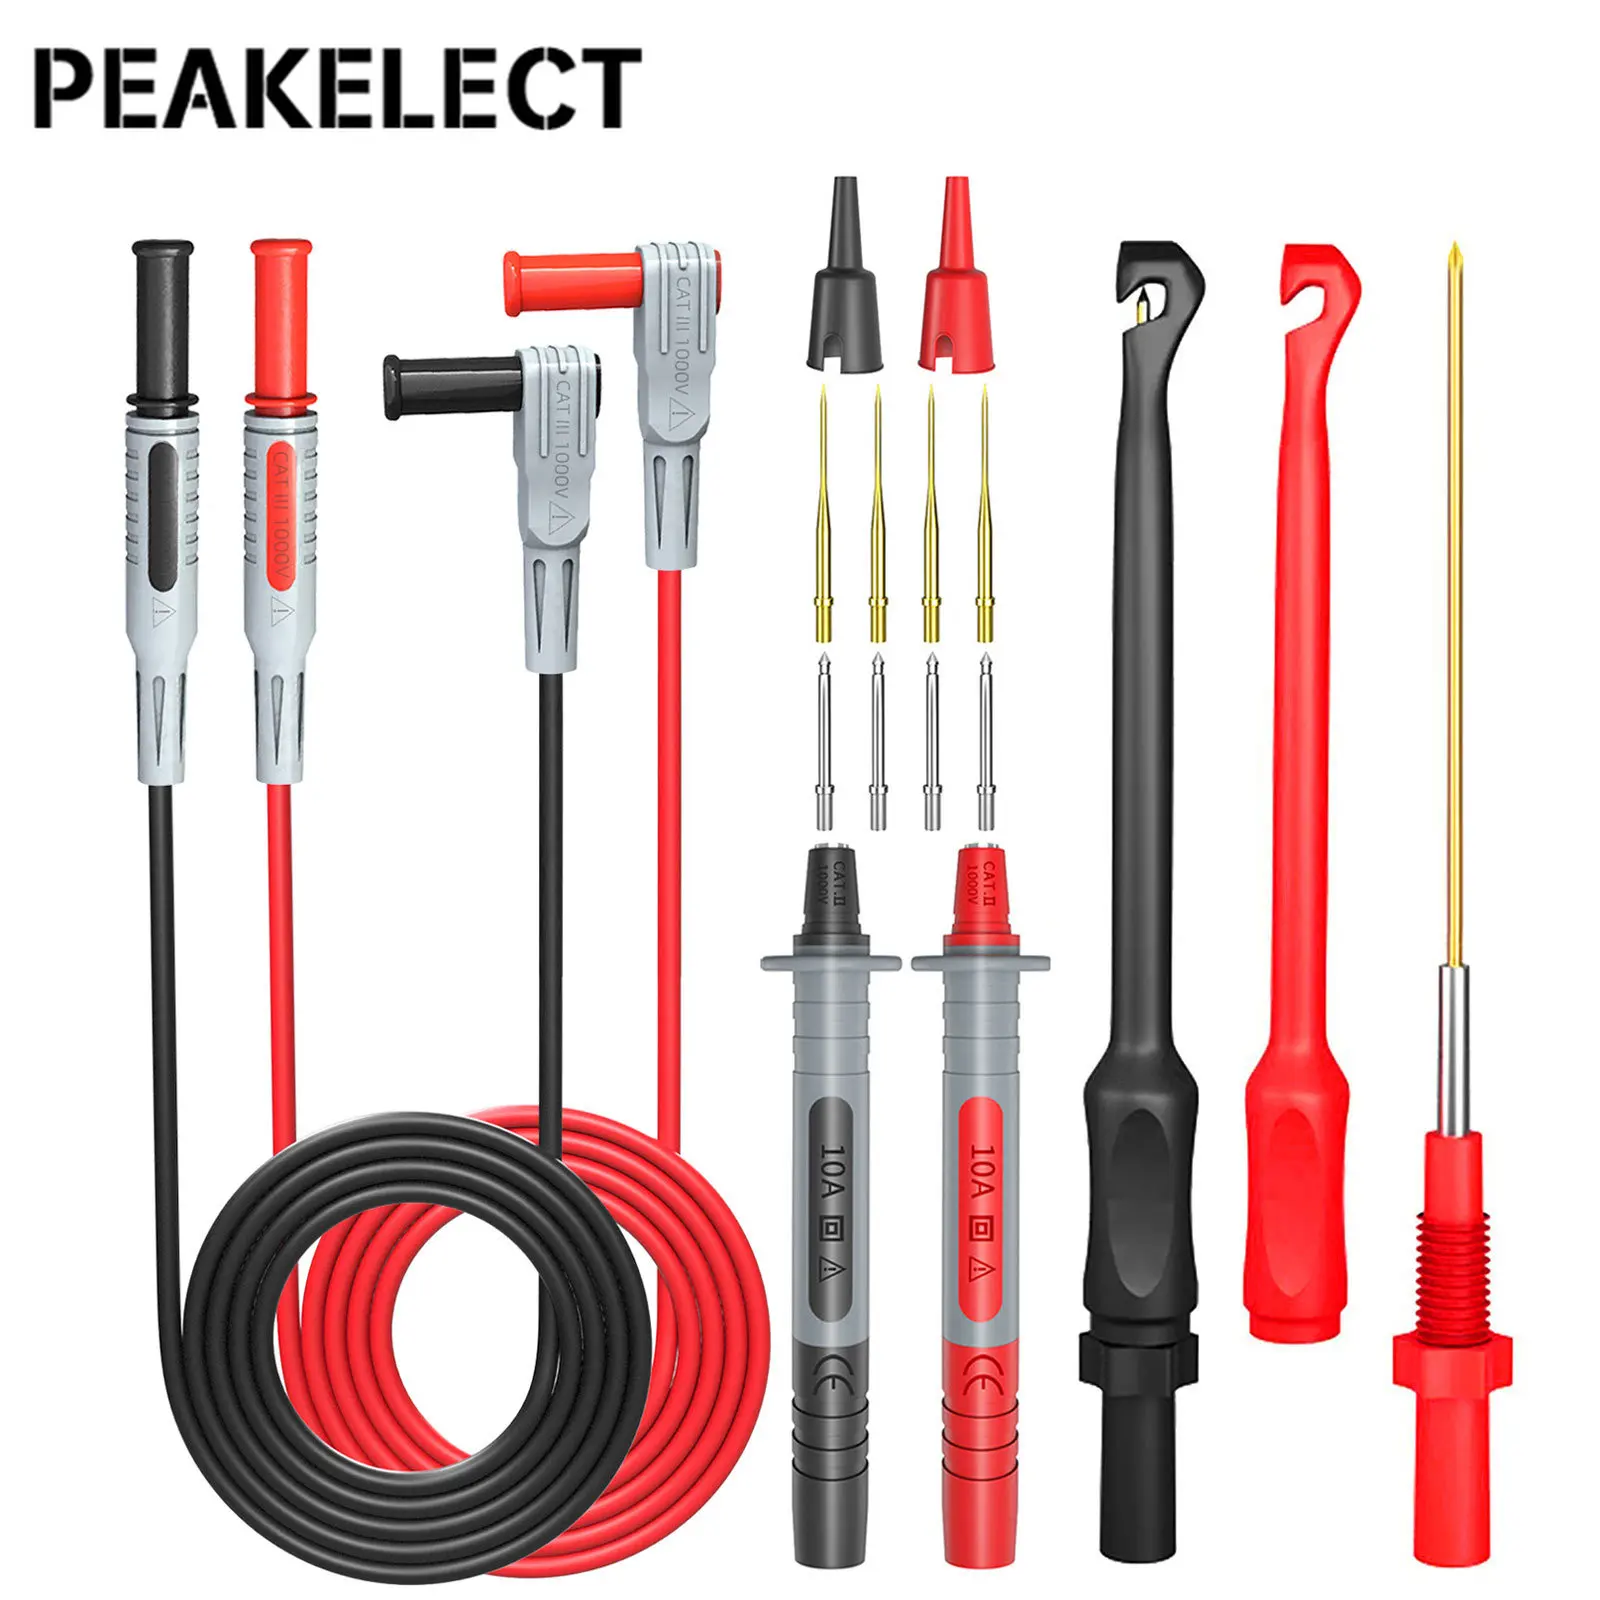 Peakelect P1033B Multimeter Test Probes Leads Kit with Wire Piercing Puncture 4mm Banana Plug Test Leads Test Probes